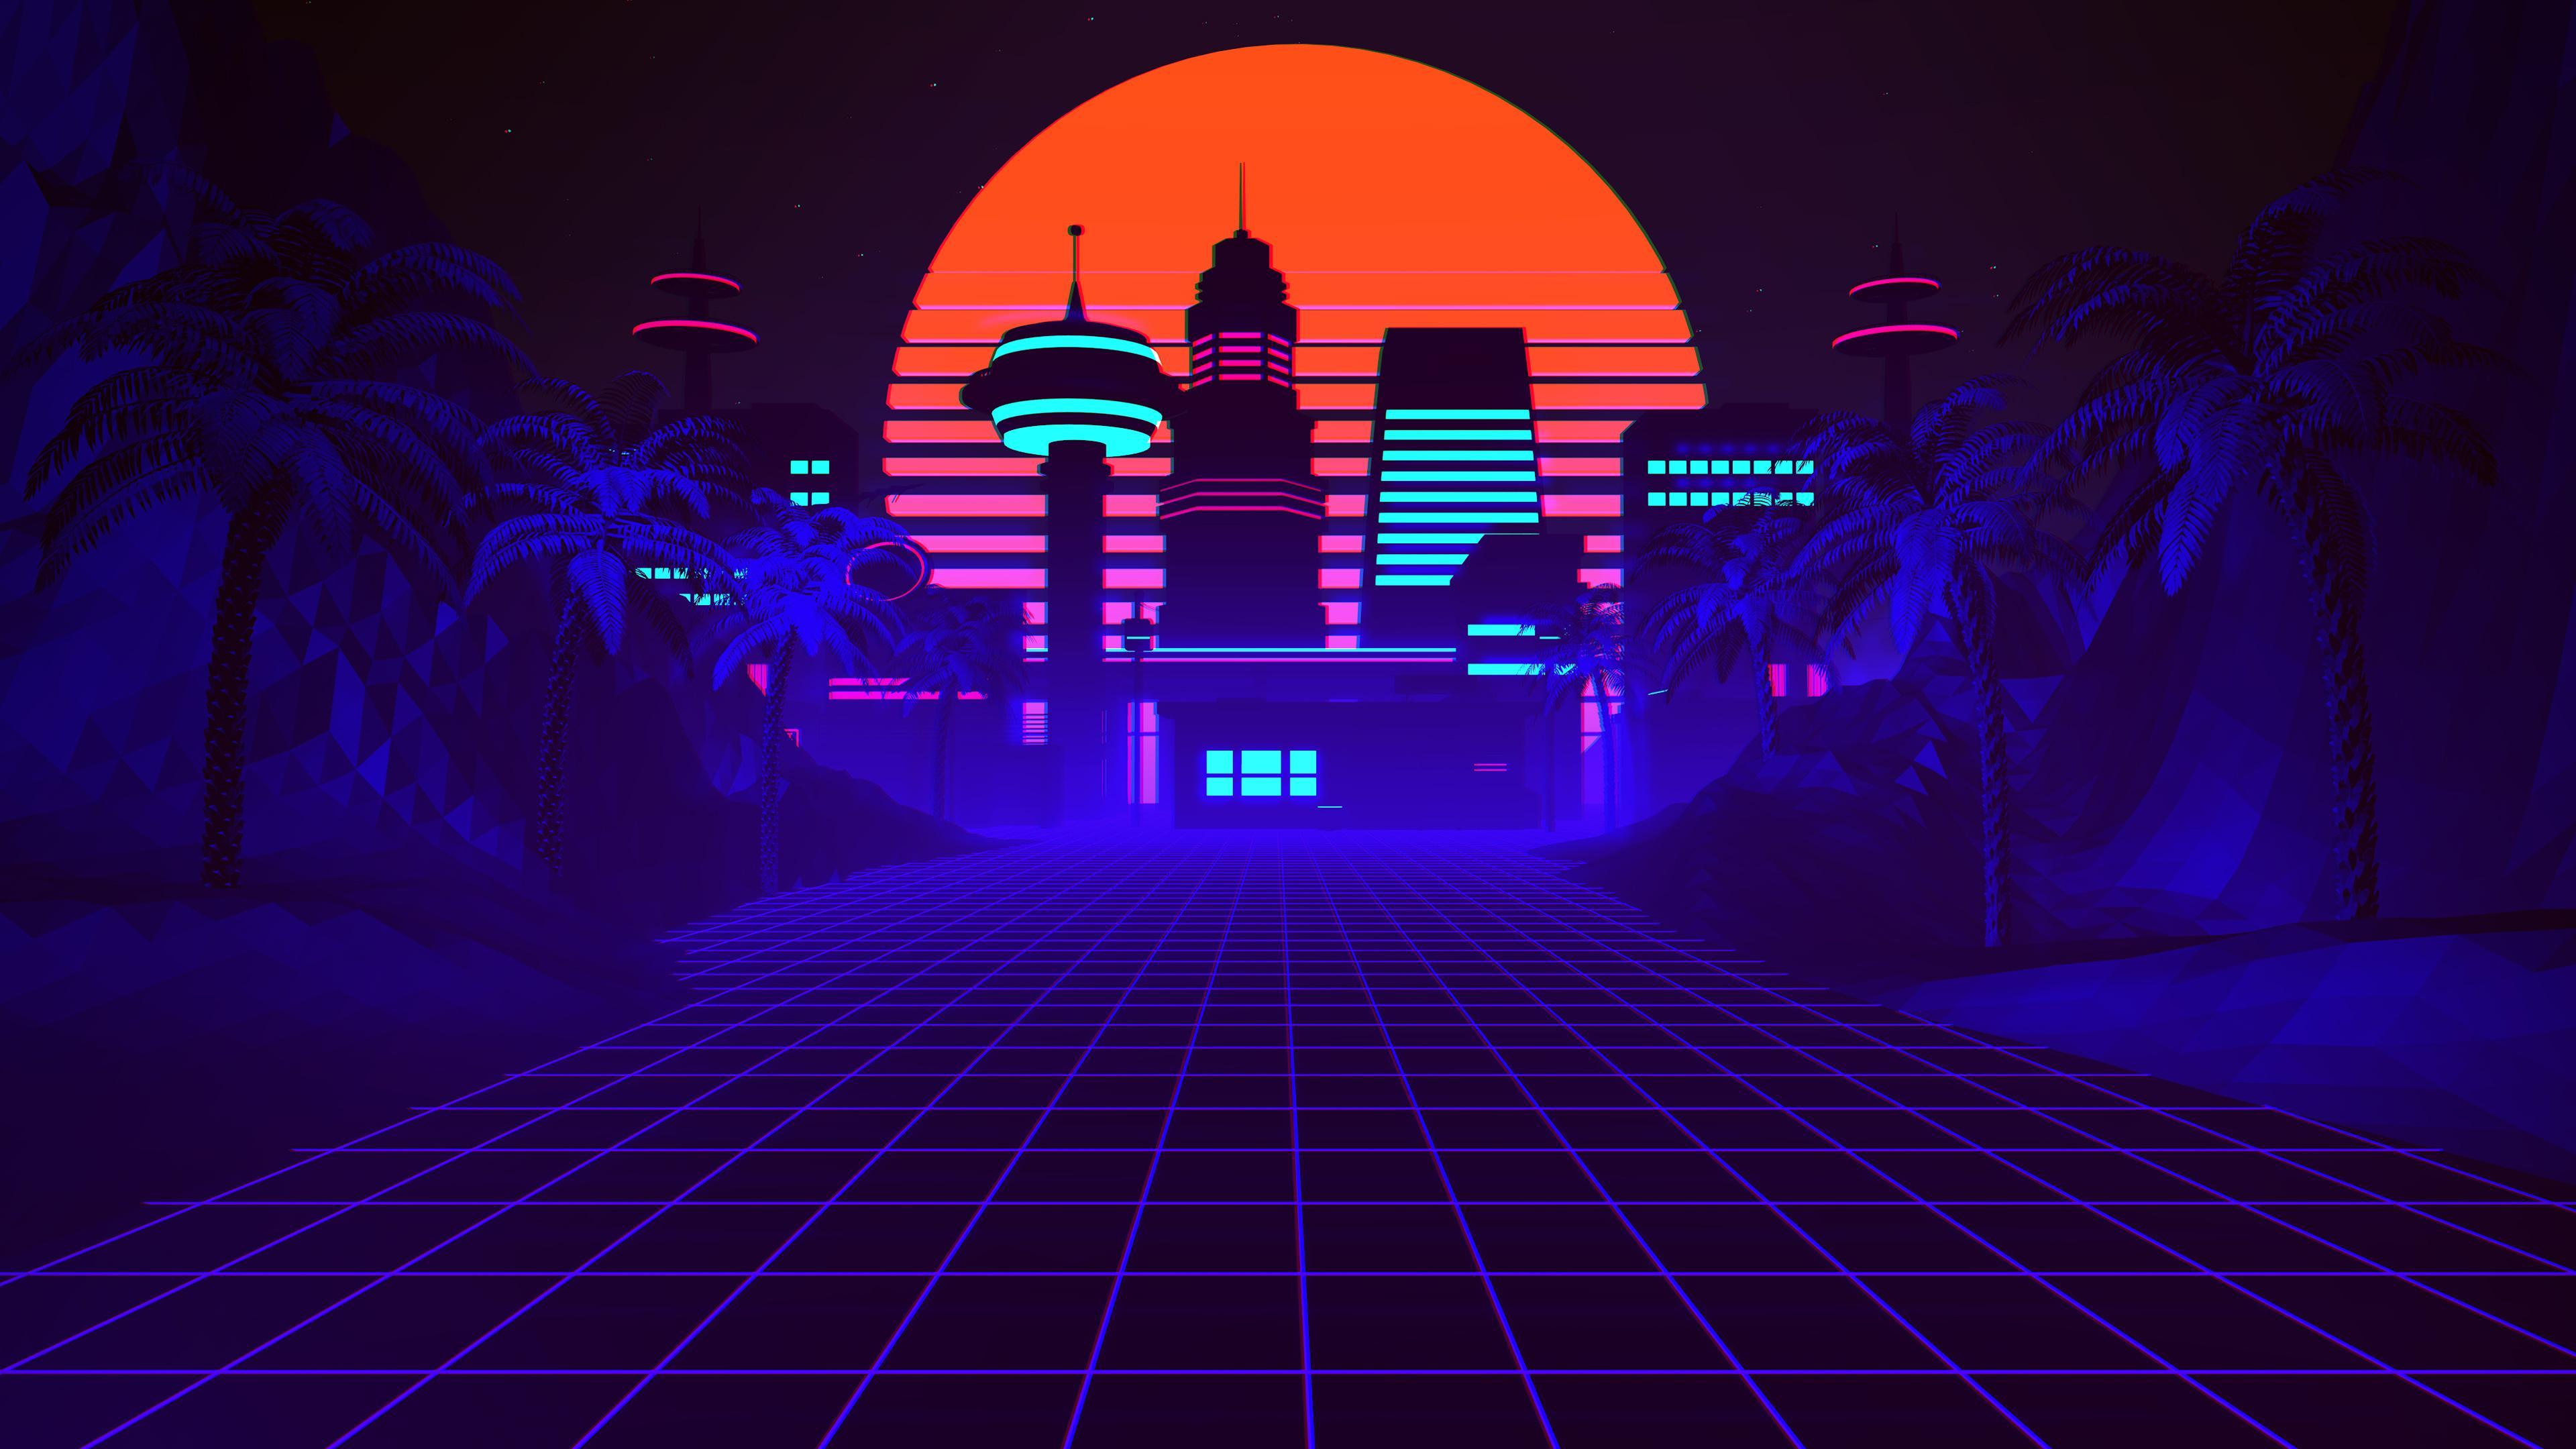 Retrowave 4K wallpaper for your desktop or mobile screen free and easy to download